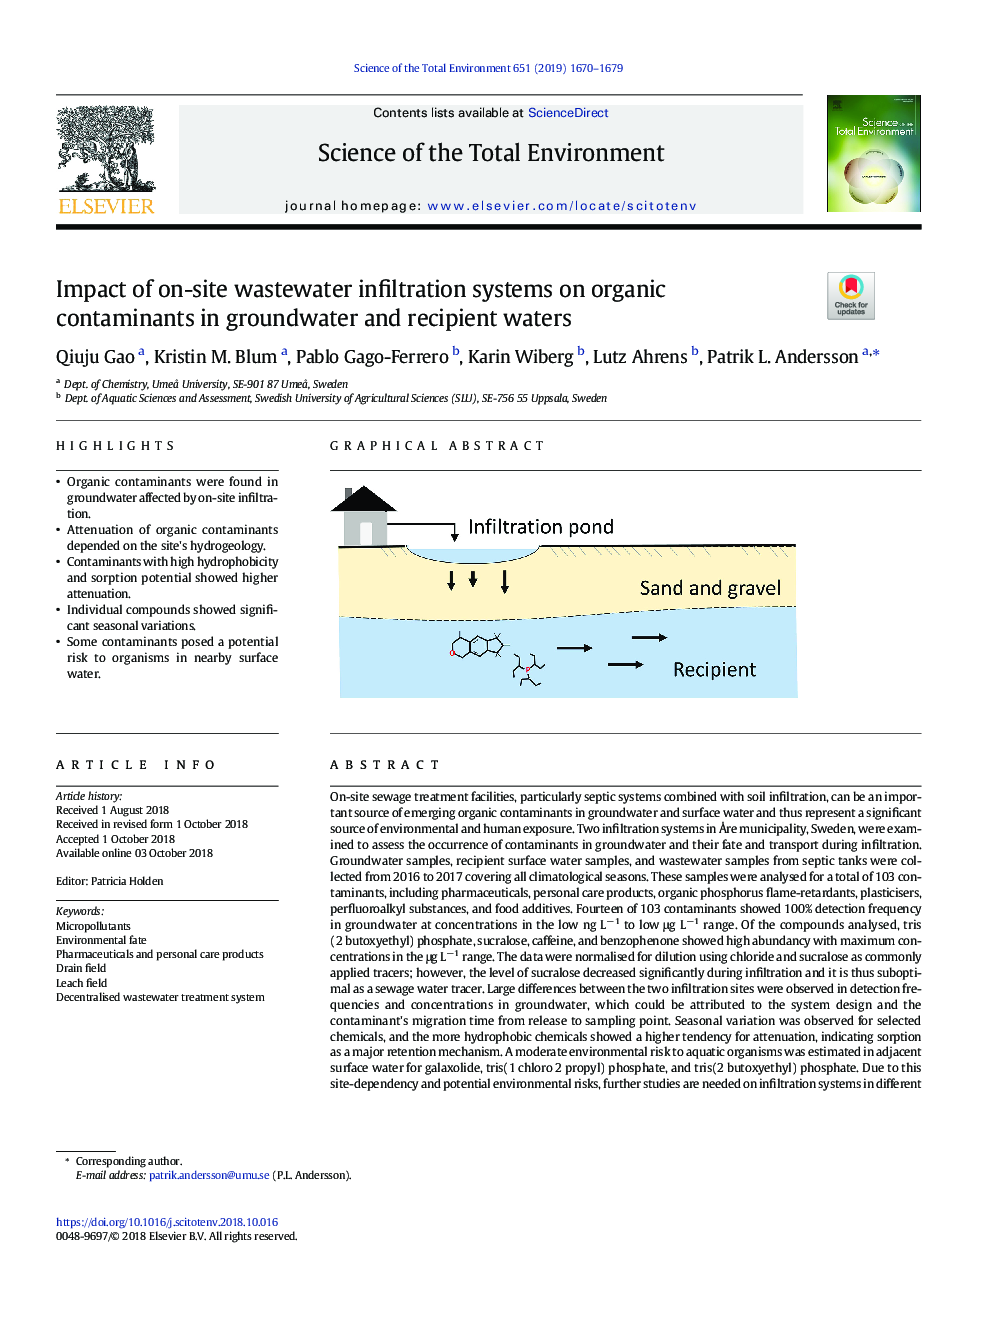 Impact of on-site wastewater infiltration systems on organic contaminants in groundwater and recipient waters